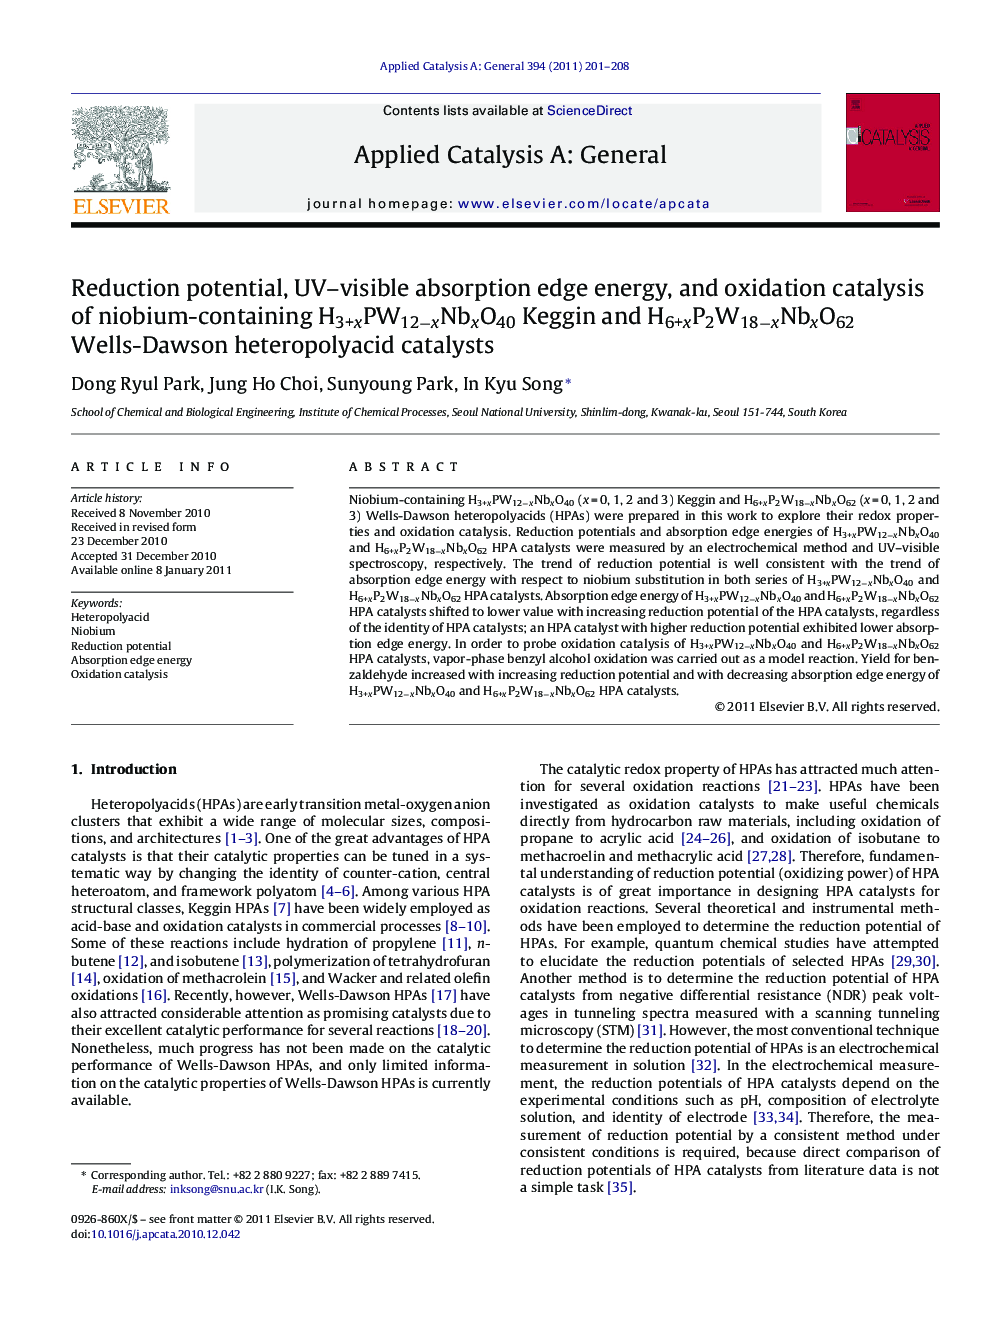 Reduction potential, UV–visible absorption edge energy, and oxidation catalysis of niobium-containing H3+xPW12−xNbxO40 Keggin and H6+xP2W18−xNbxO62 Wells-Dawson heteropolyacid catalysts